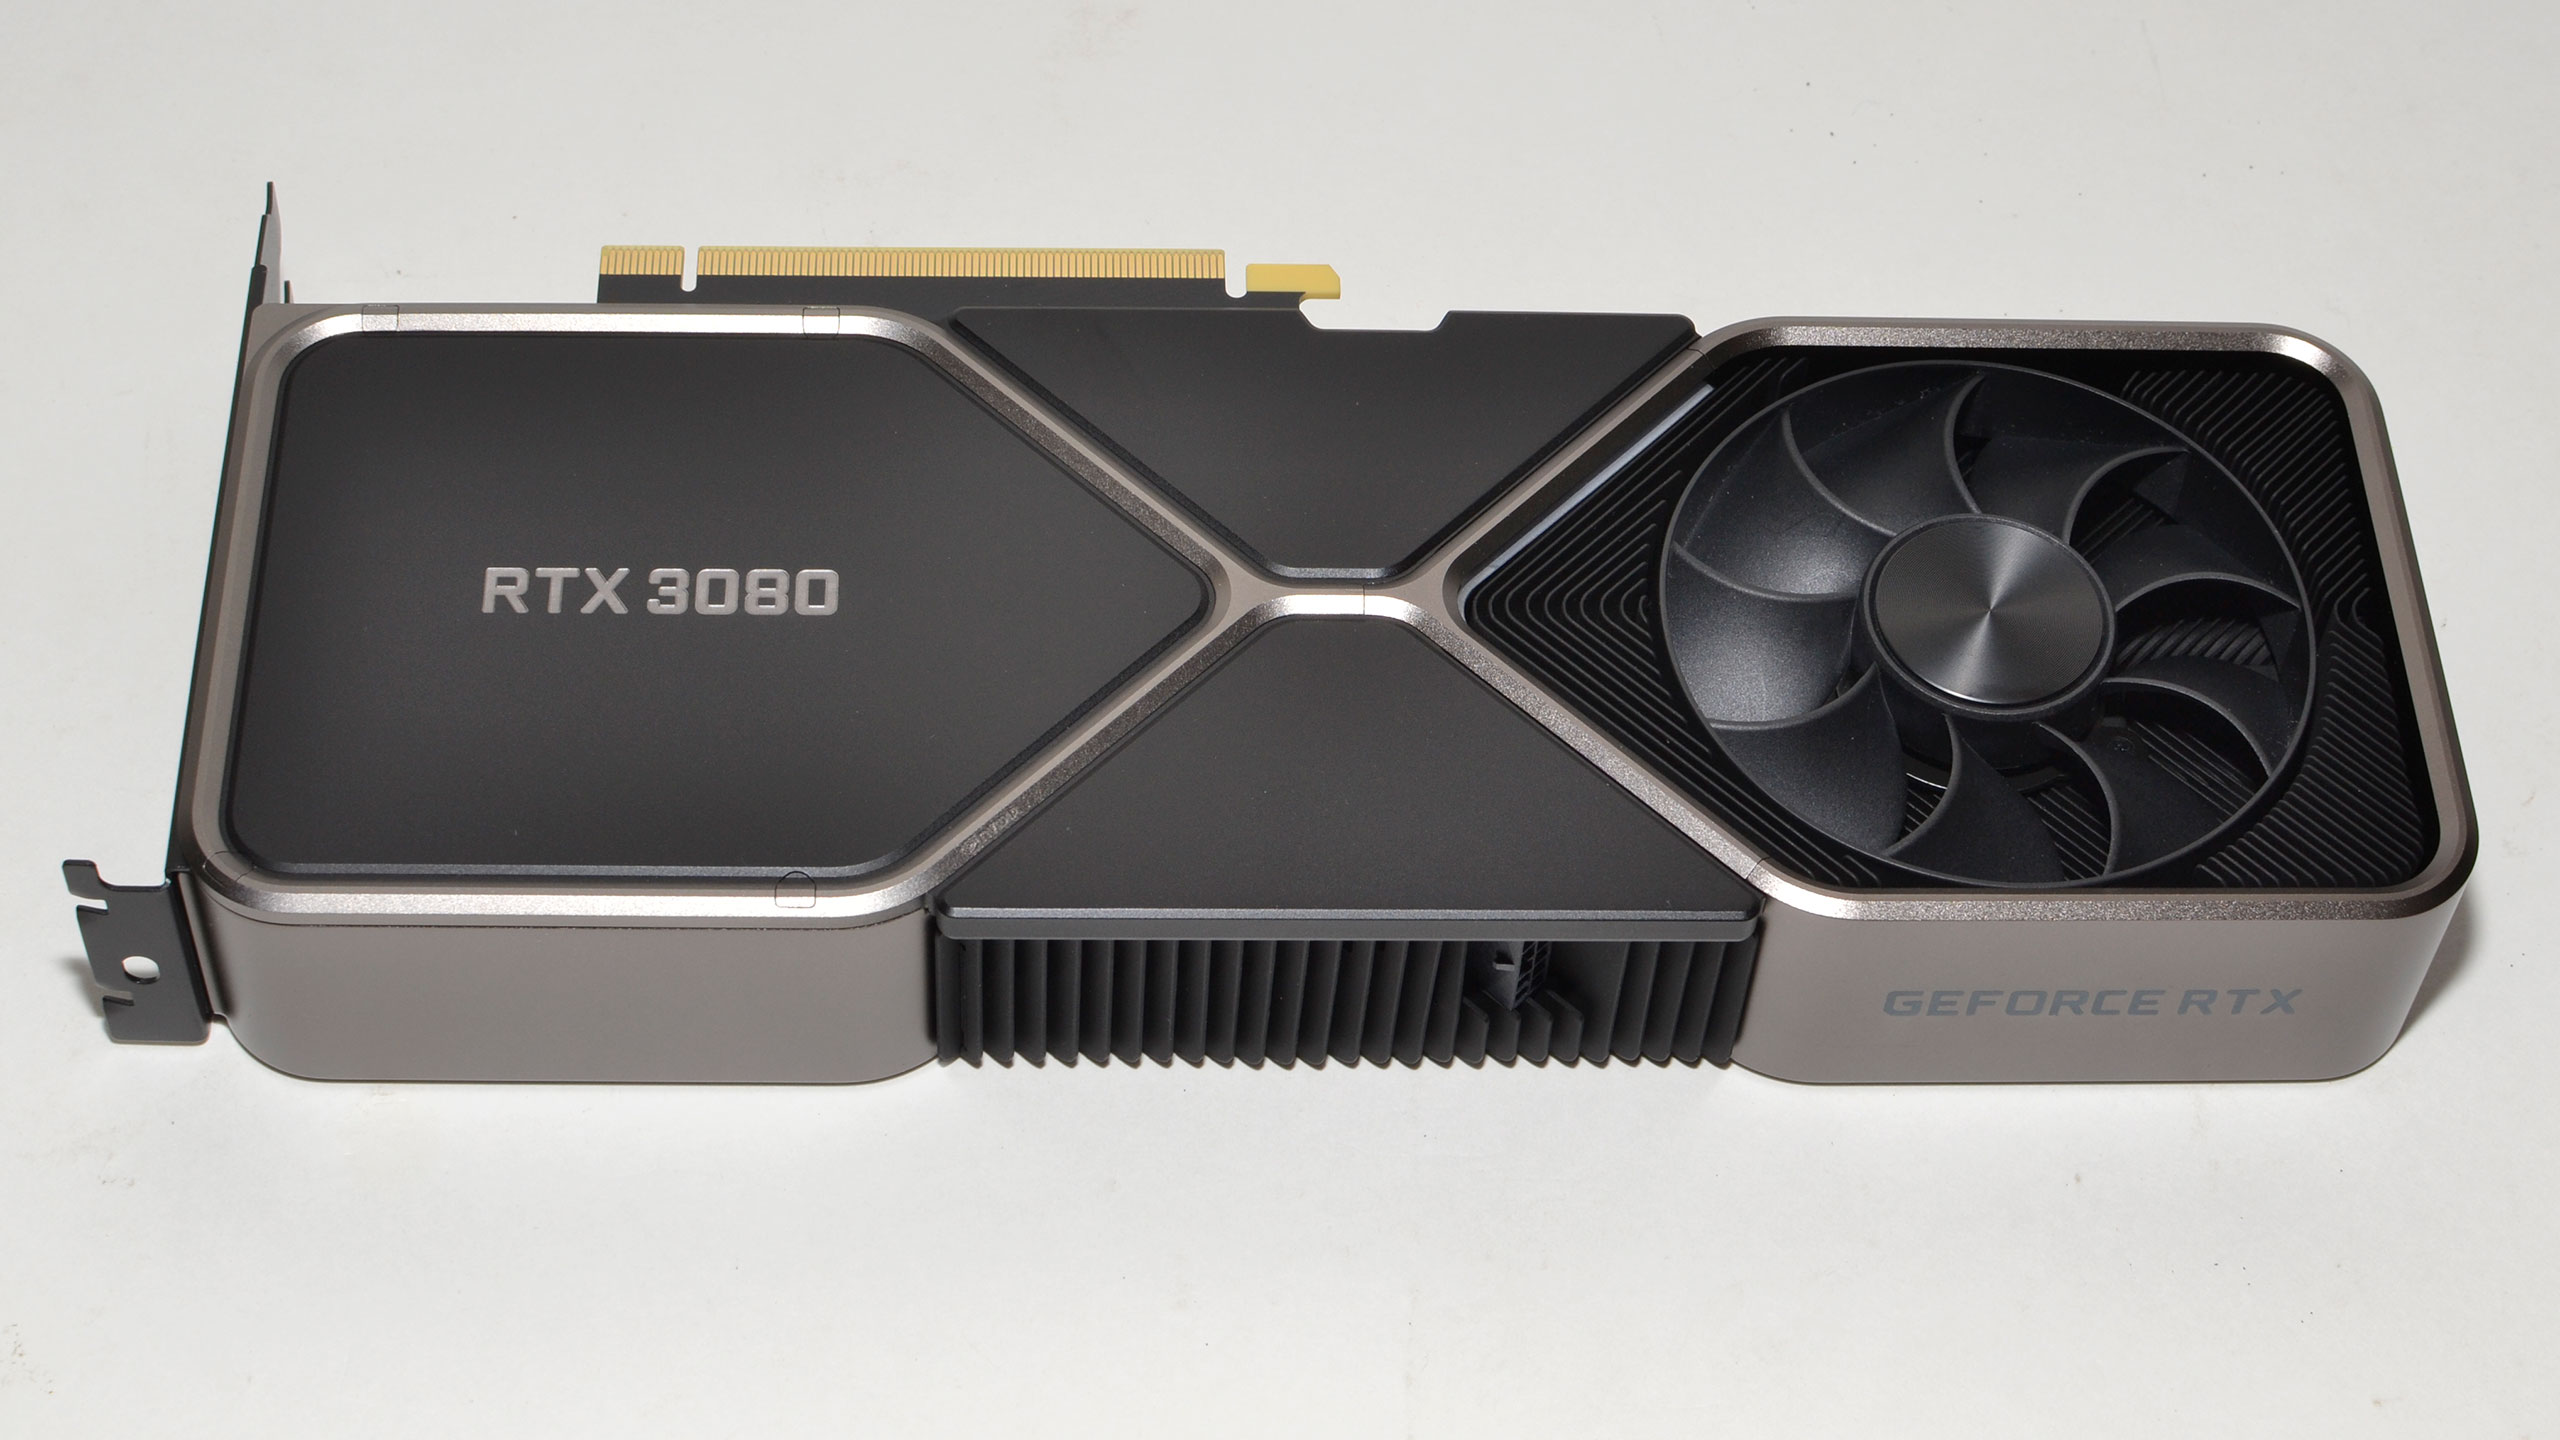 nvidia-geforce-rtx-3080-founders-edition-review:-a-huge-generational-leap-in-performance